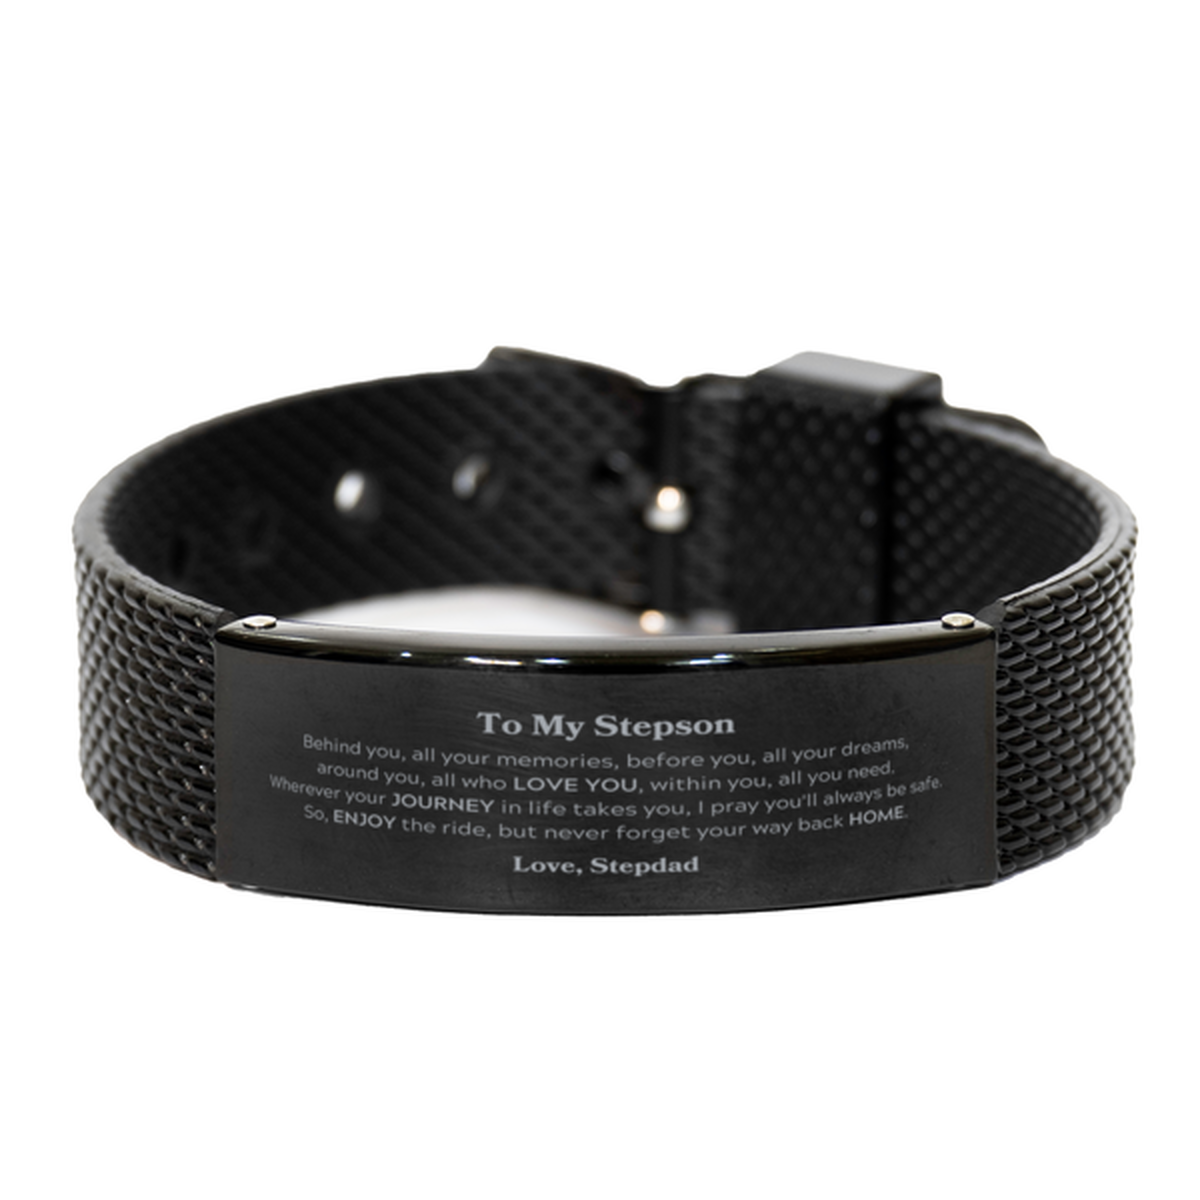 To My Stepson Graduation Gifts from Stepdad, Stepson Black Shark Mesh Bracelet Christmas Birthday Gifts for Stepson Behind you, all your memories, before you, all your dreams. Love, Stepdad